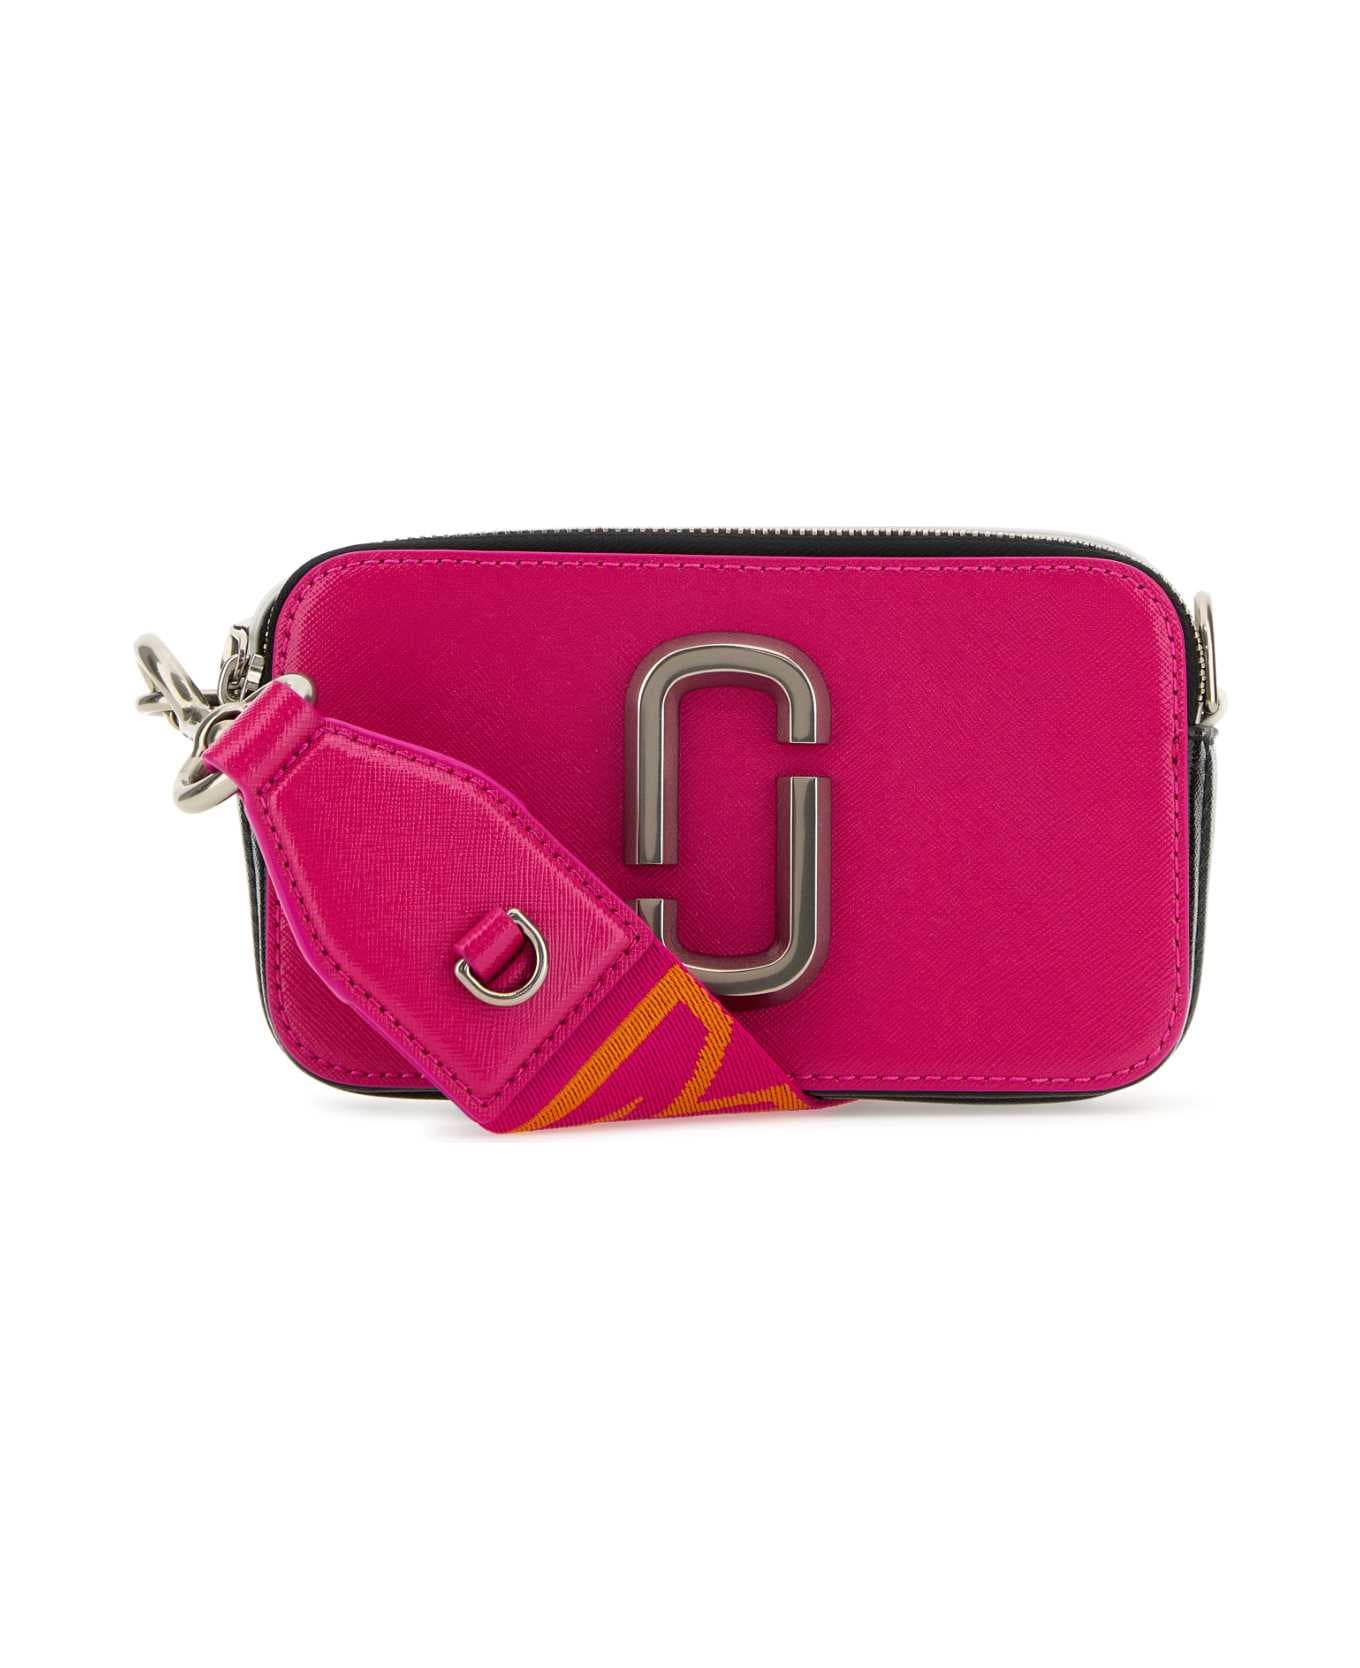 Marc Jacobs Multicolor Leather The Snapshot Crossbody Bag - HOTPINKMULTI